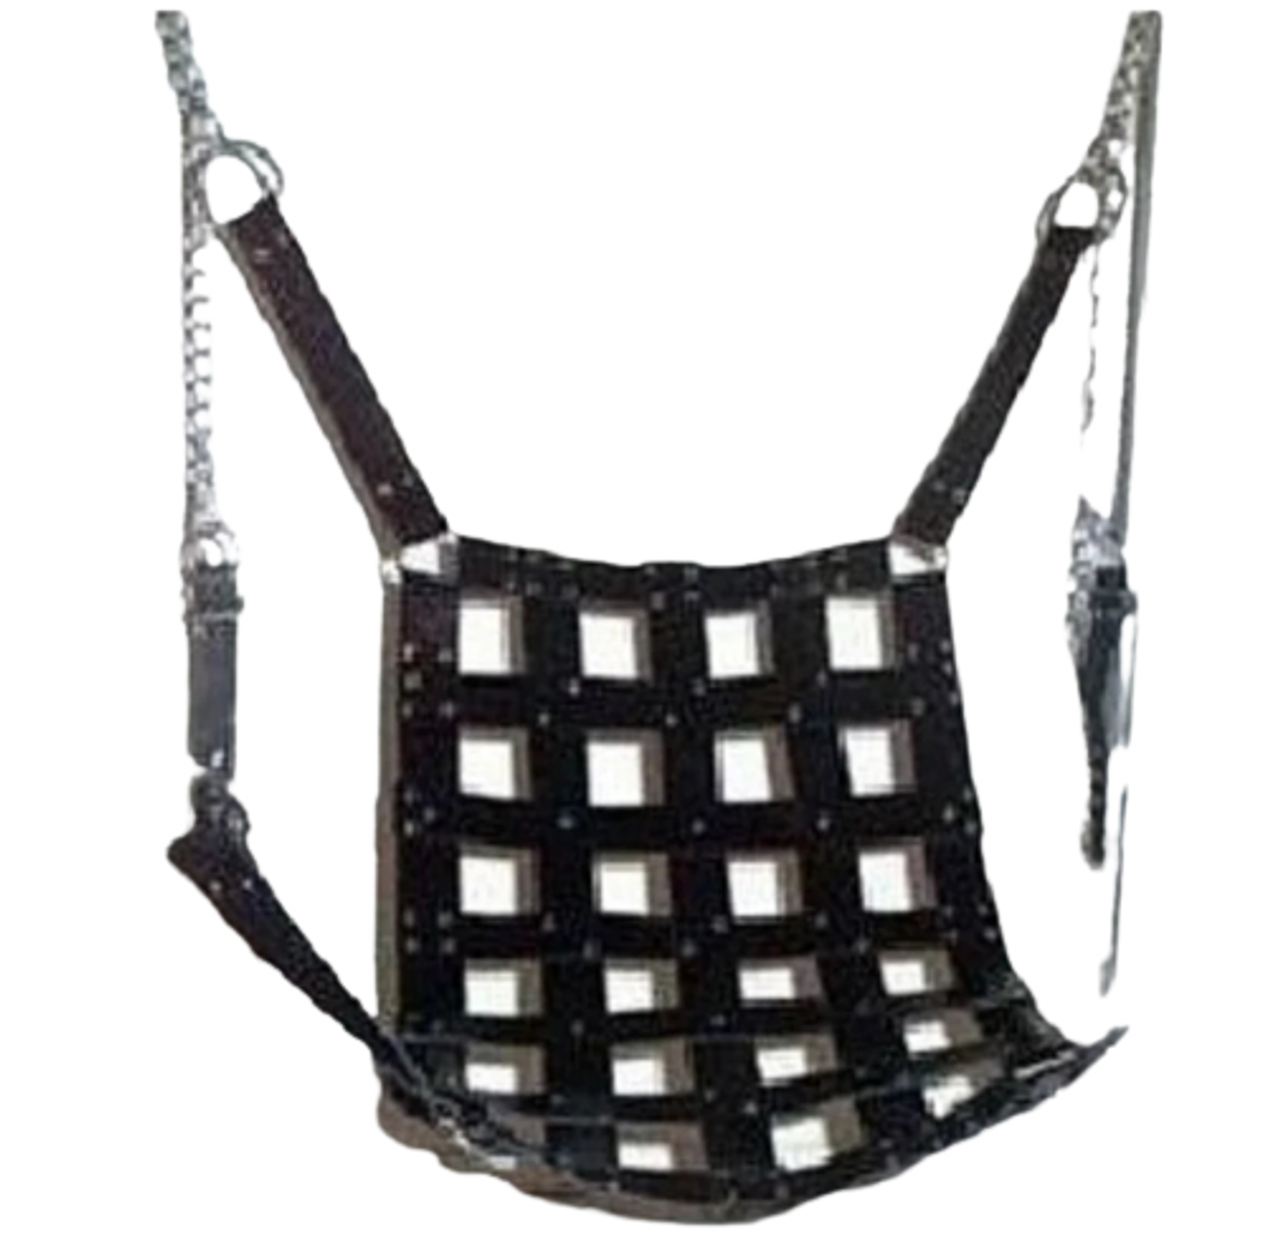 BDSM Net Leather Swing Genuine leather swing For BDSM